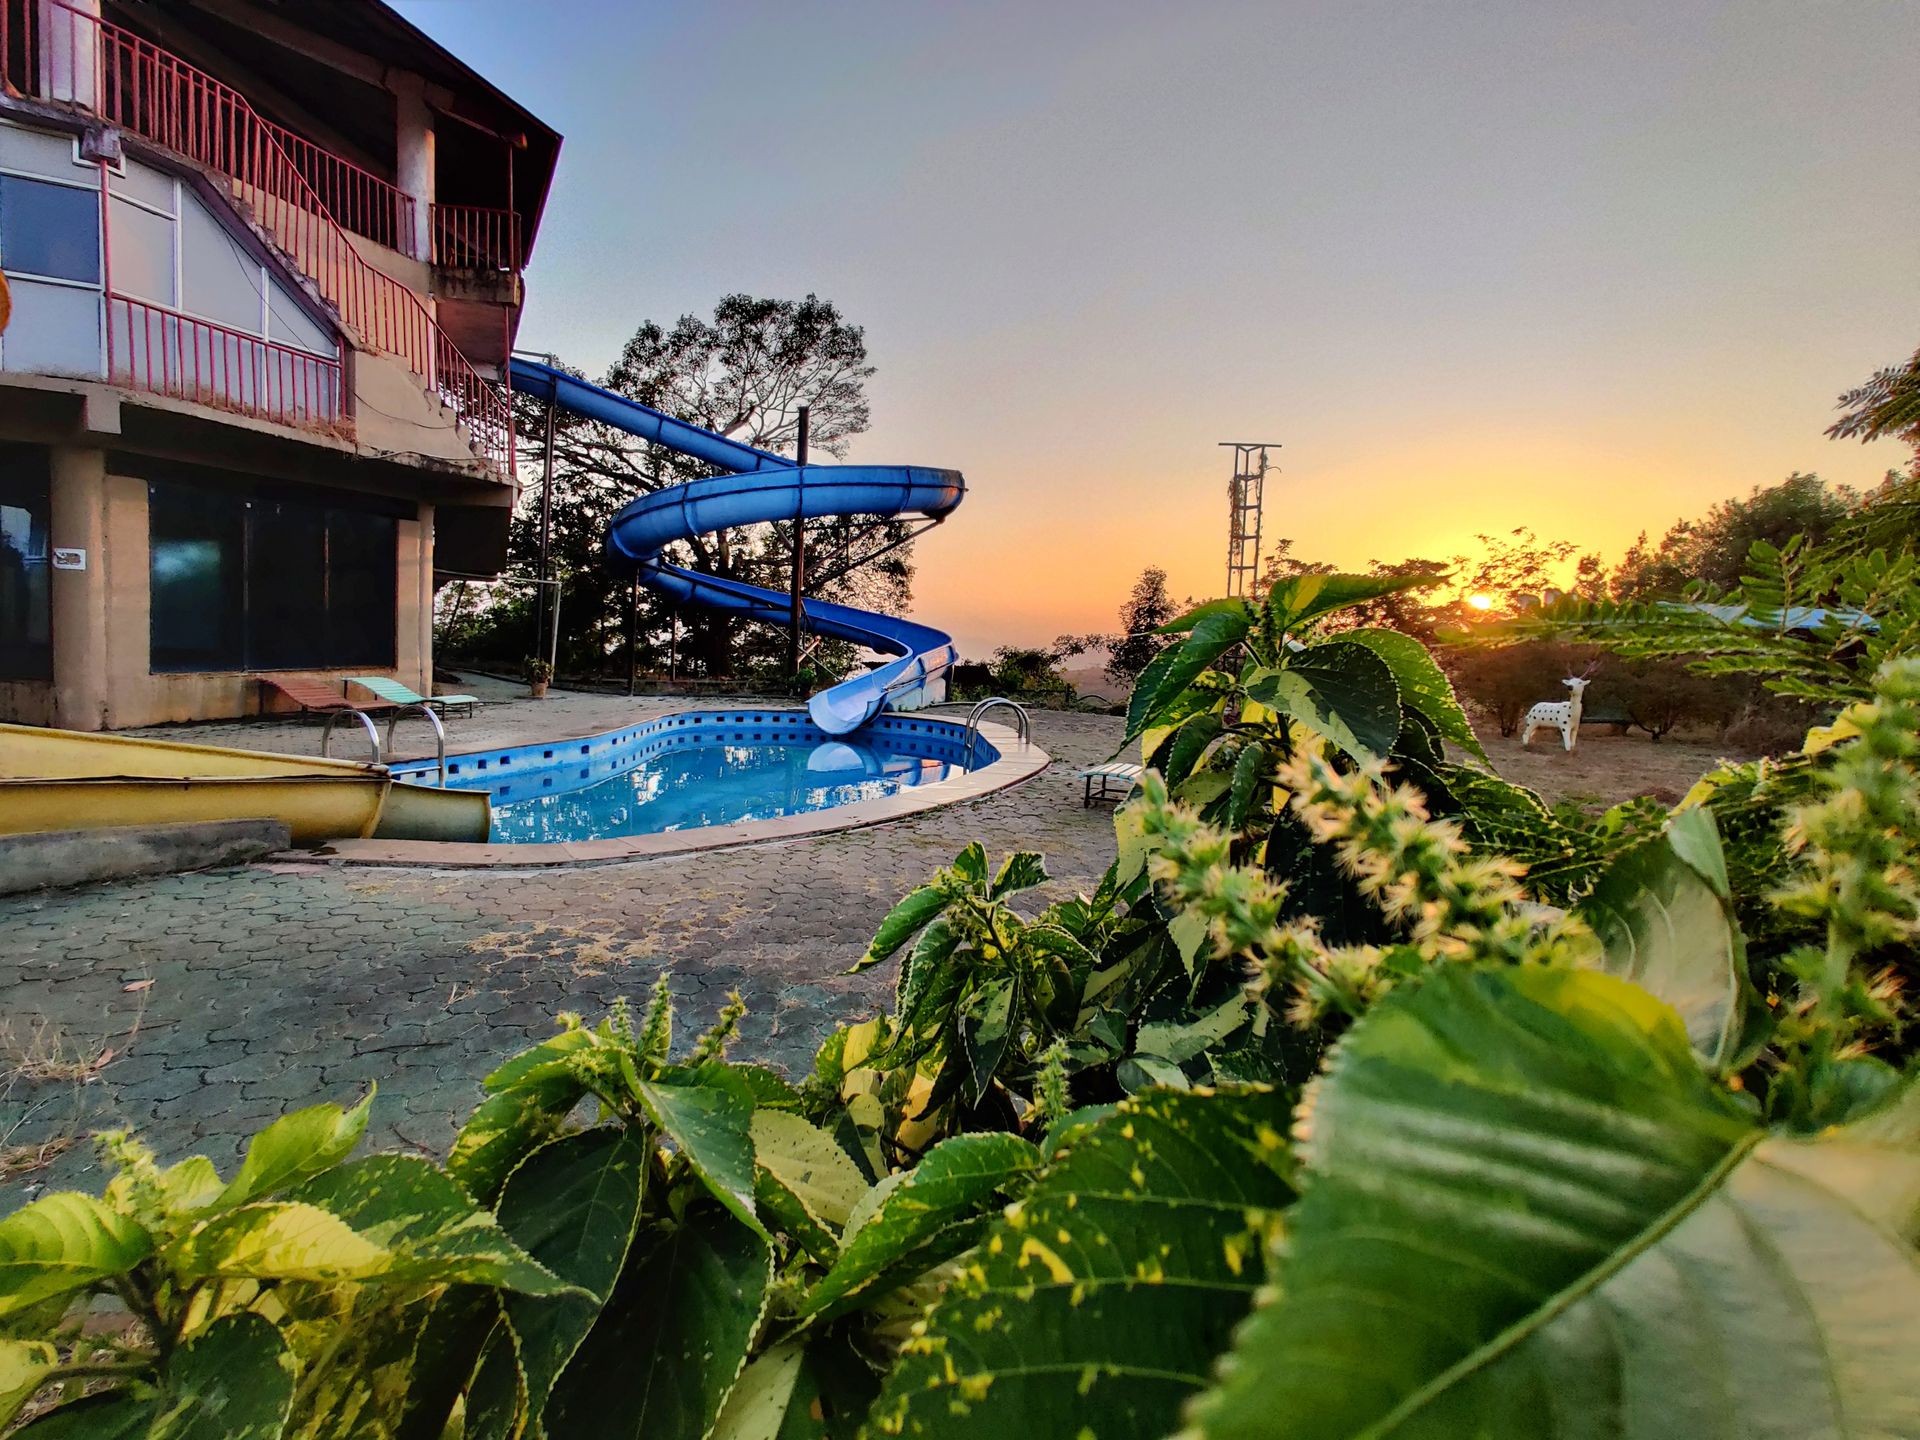 Photo of the Adult water Slides at Mantra Resort